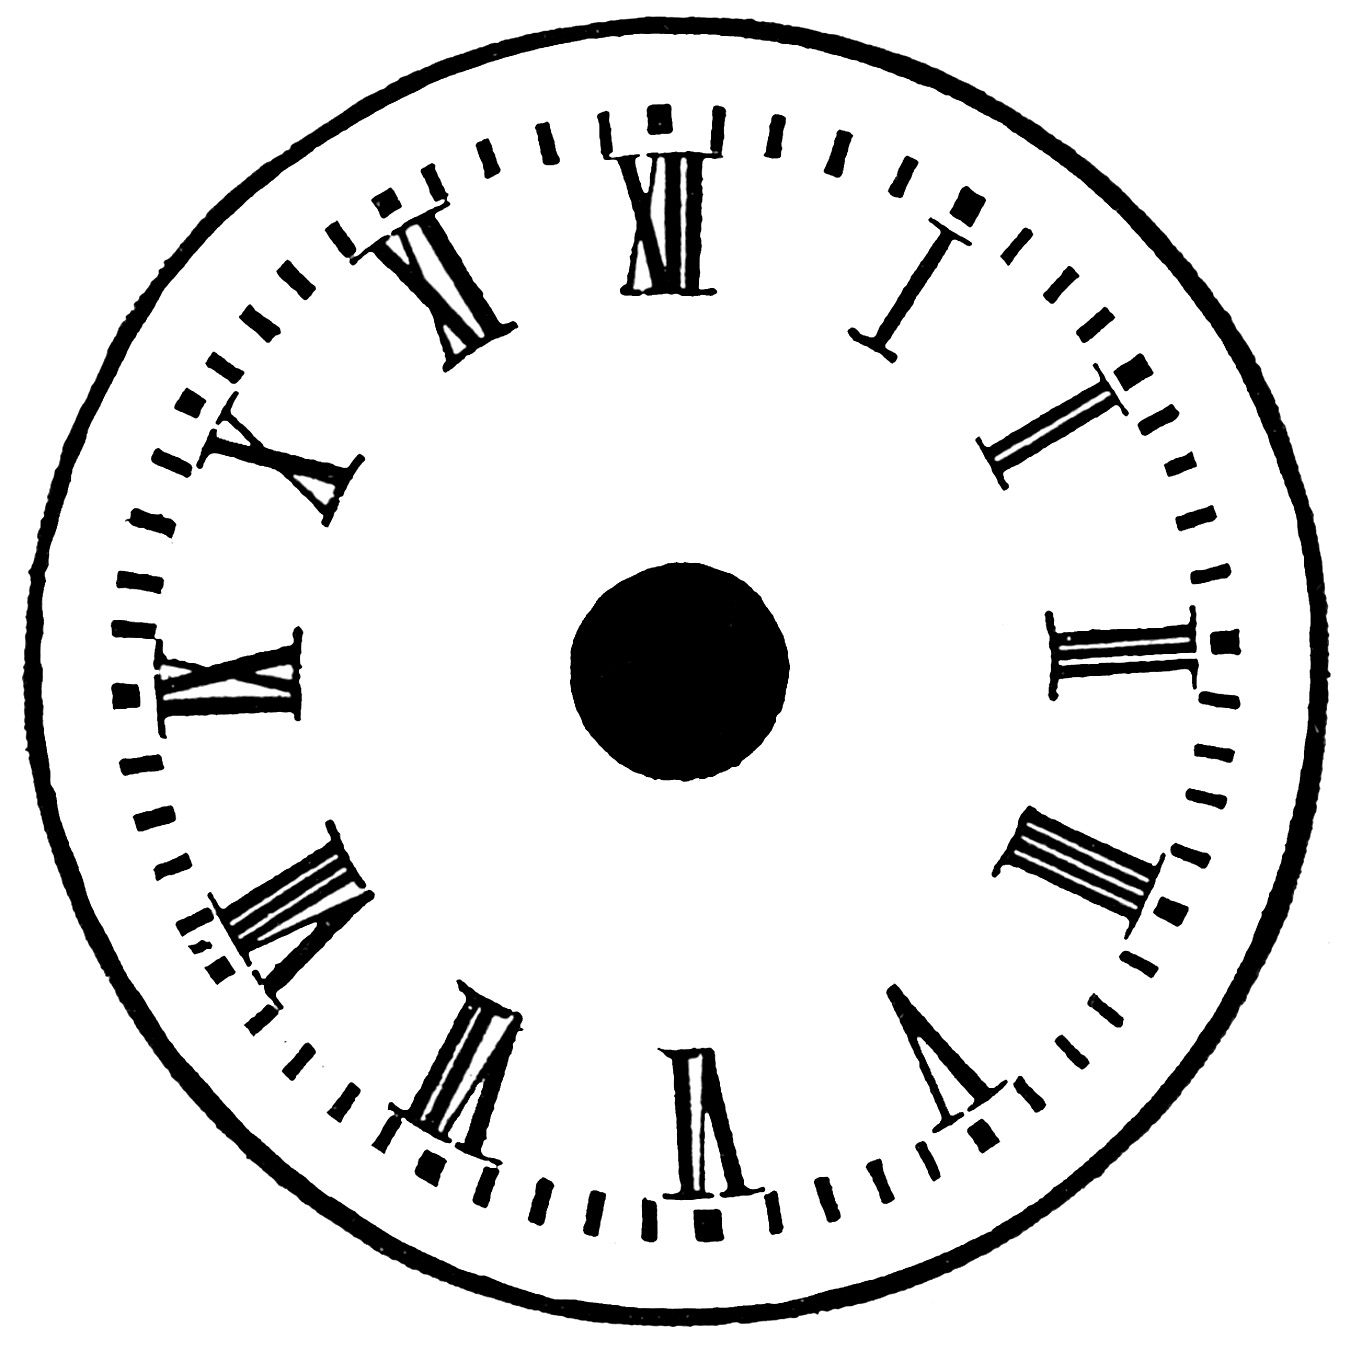 Images Of Clocks Without Hands - ClipArt Best